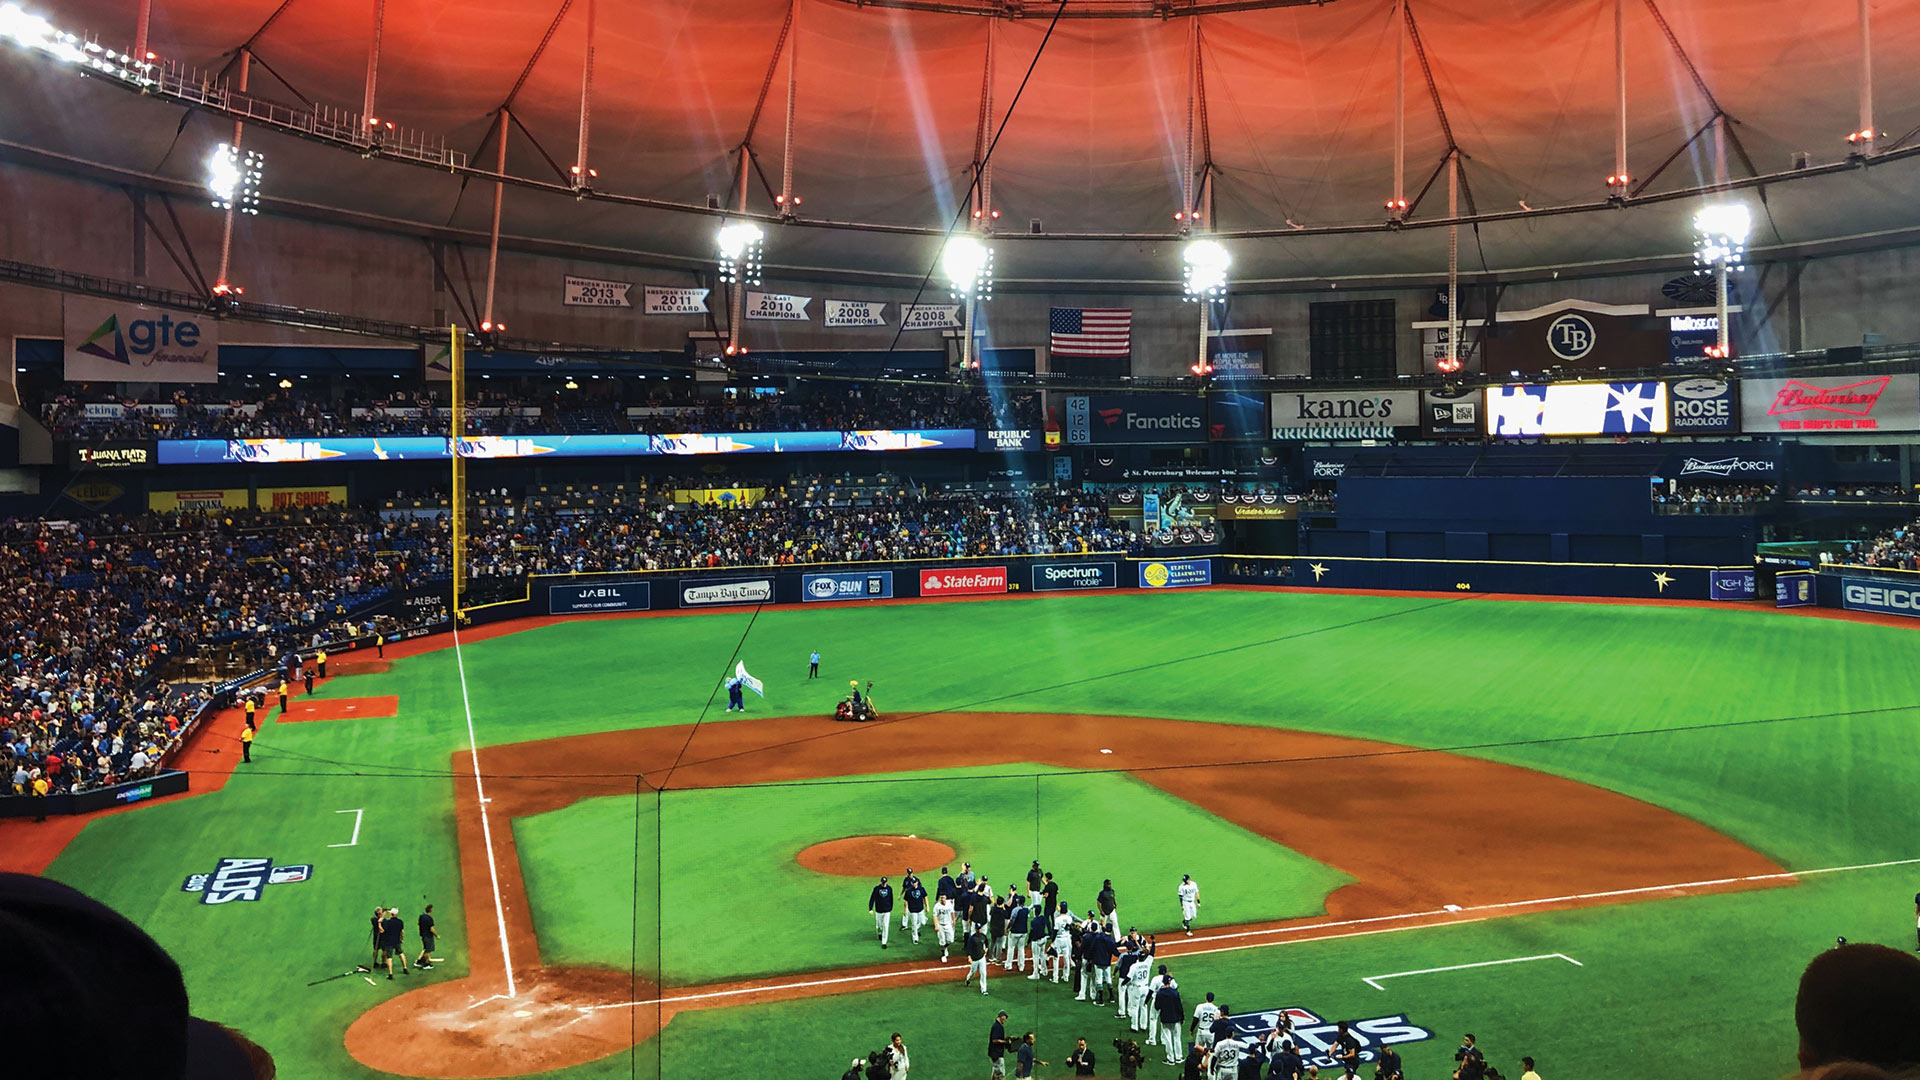 Rays' Pride day event will have a different look this year